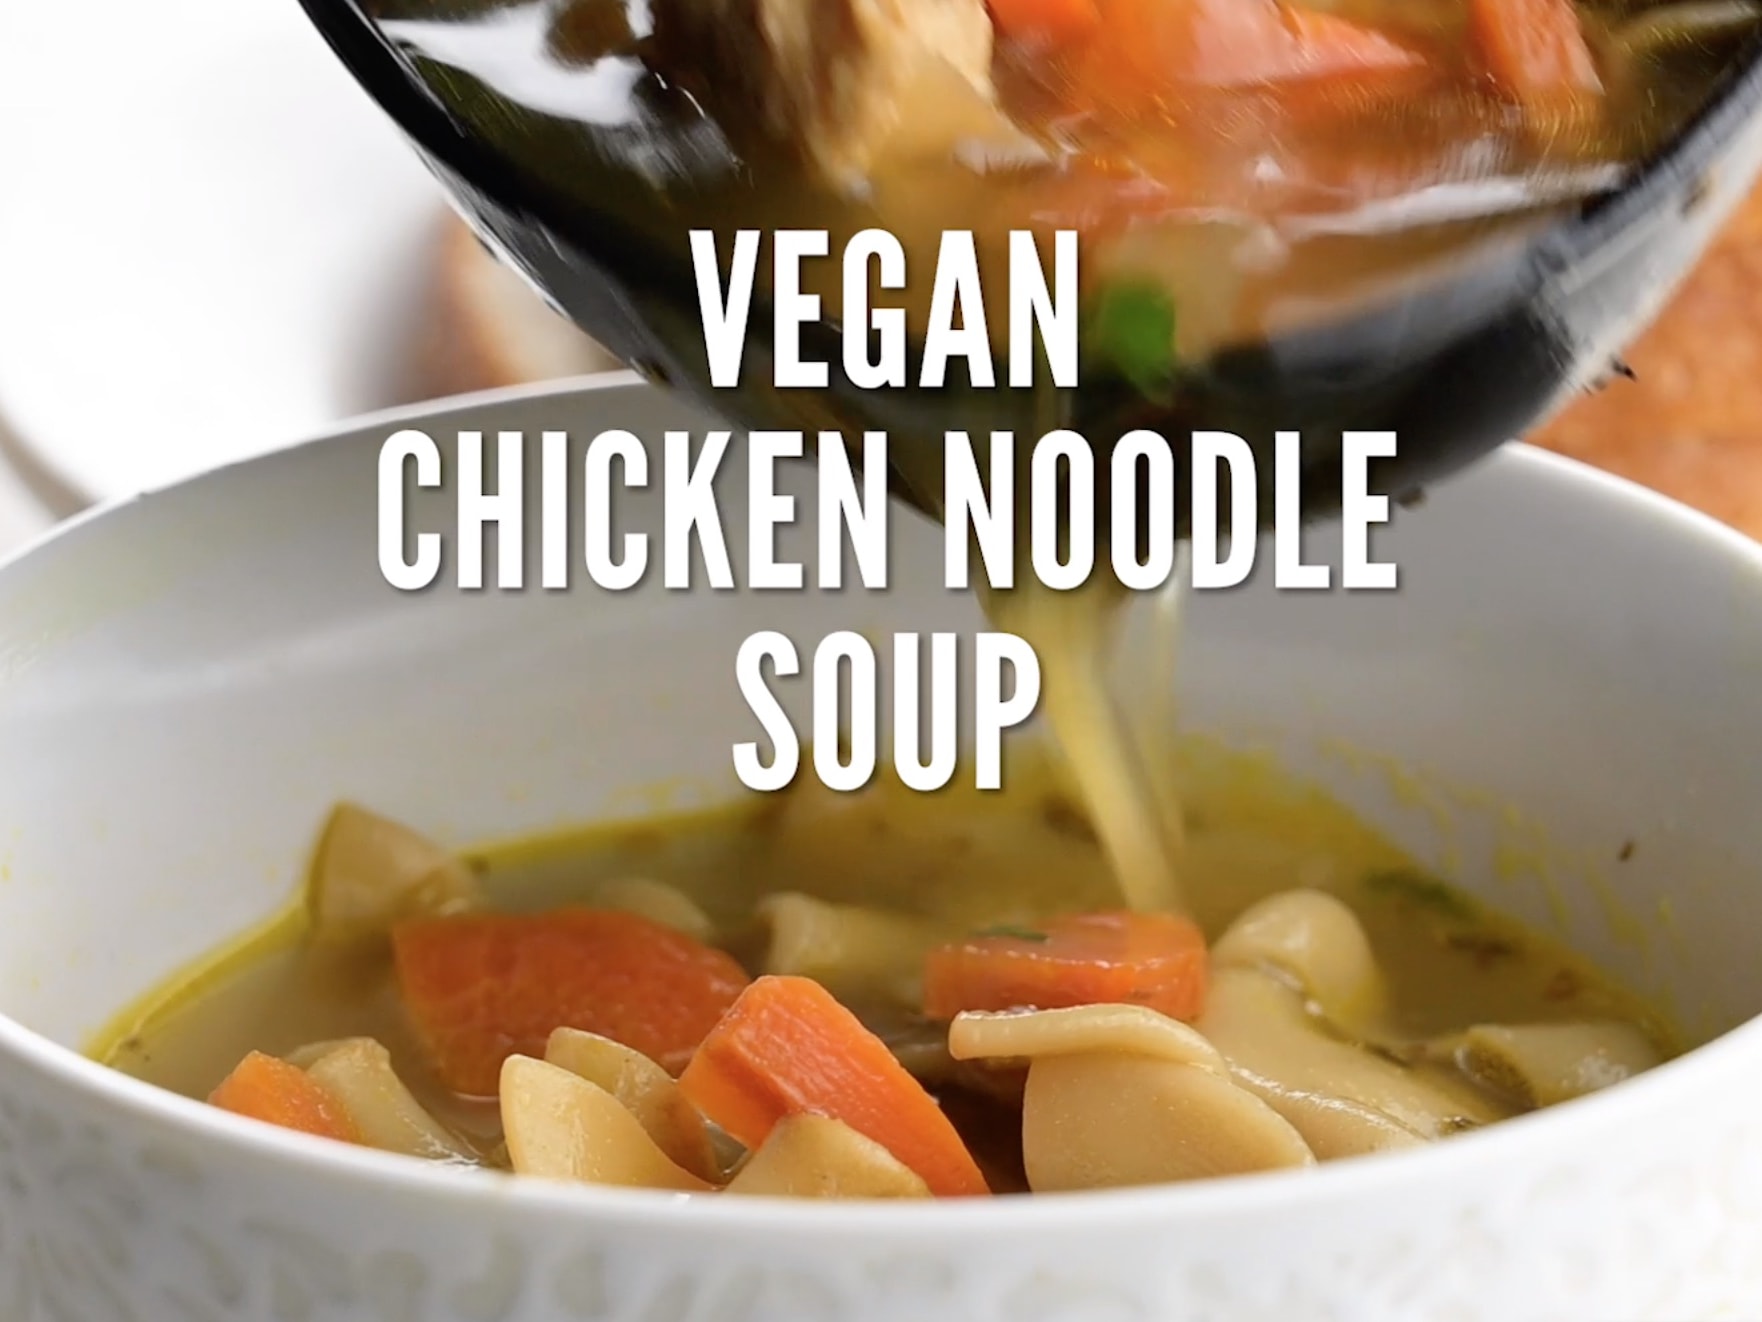 Vegan Chicken Noodle Soup - Cooking For Peanuts